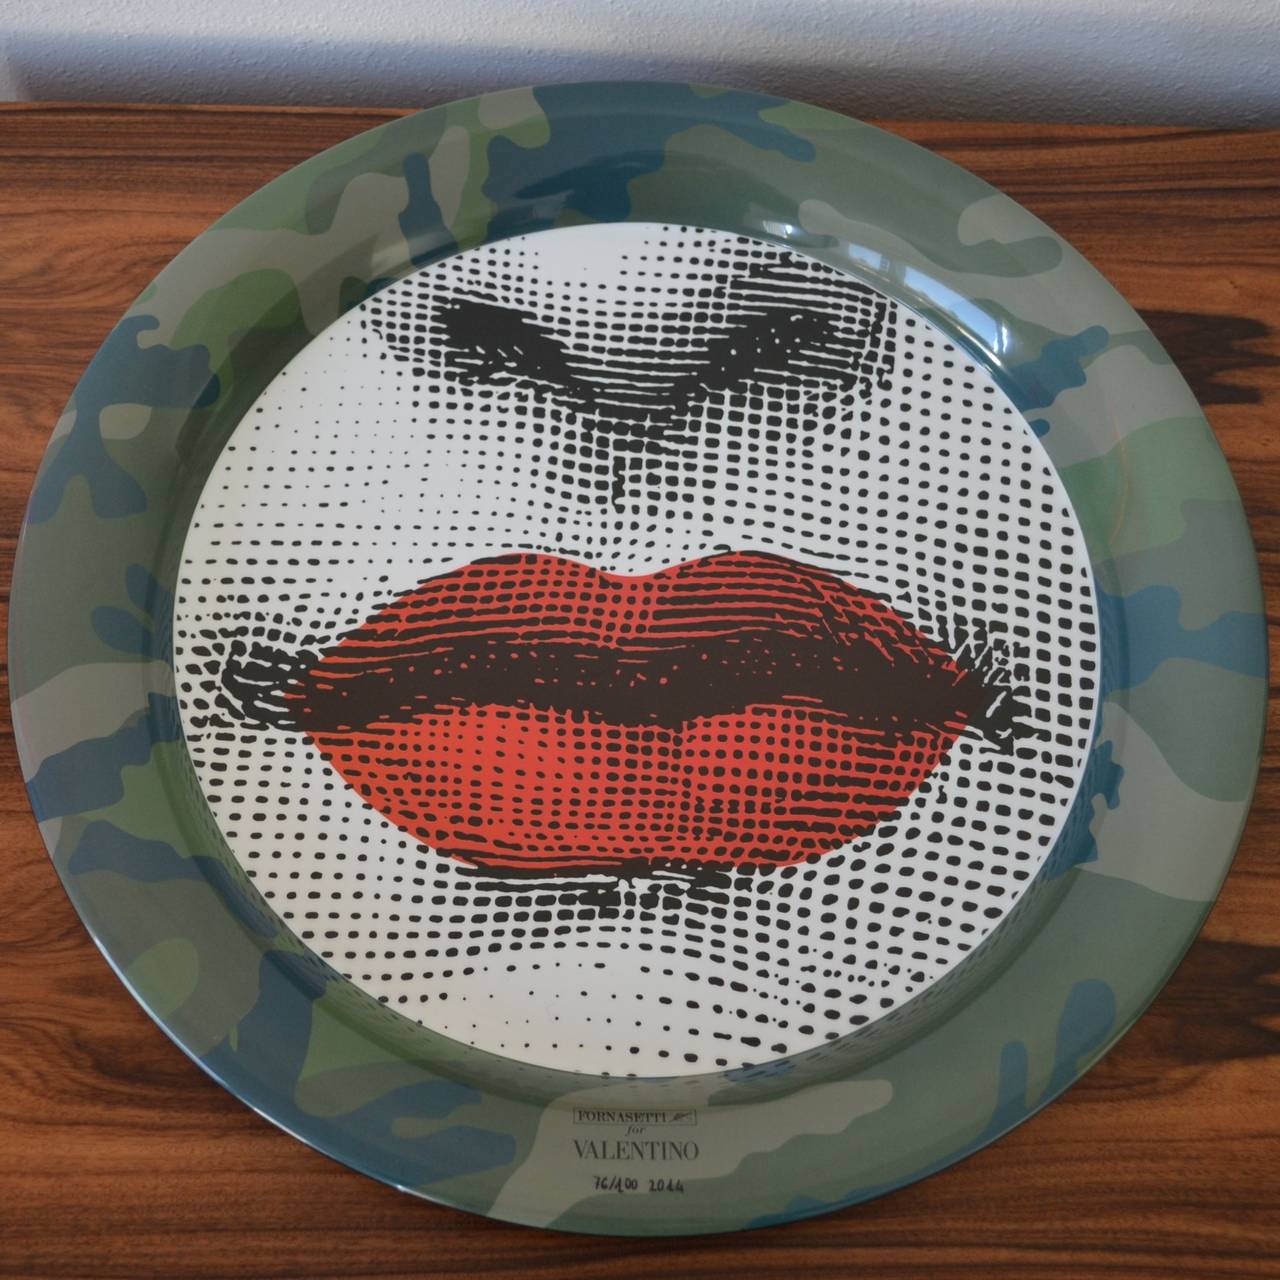 Capsule collection Valentino & Fornasetti Tray 
Limited edition 100 piece, this one is 76/100
Never use, with original box.